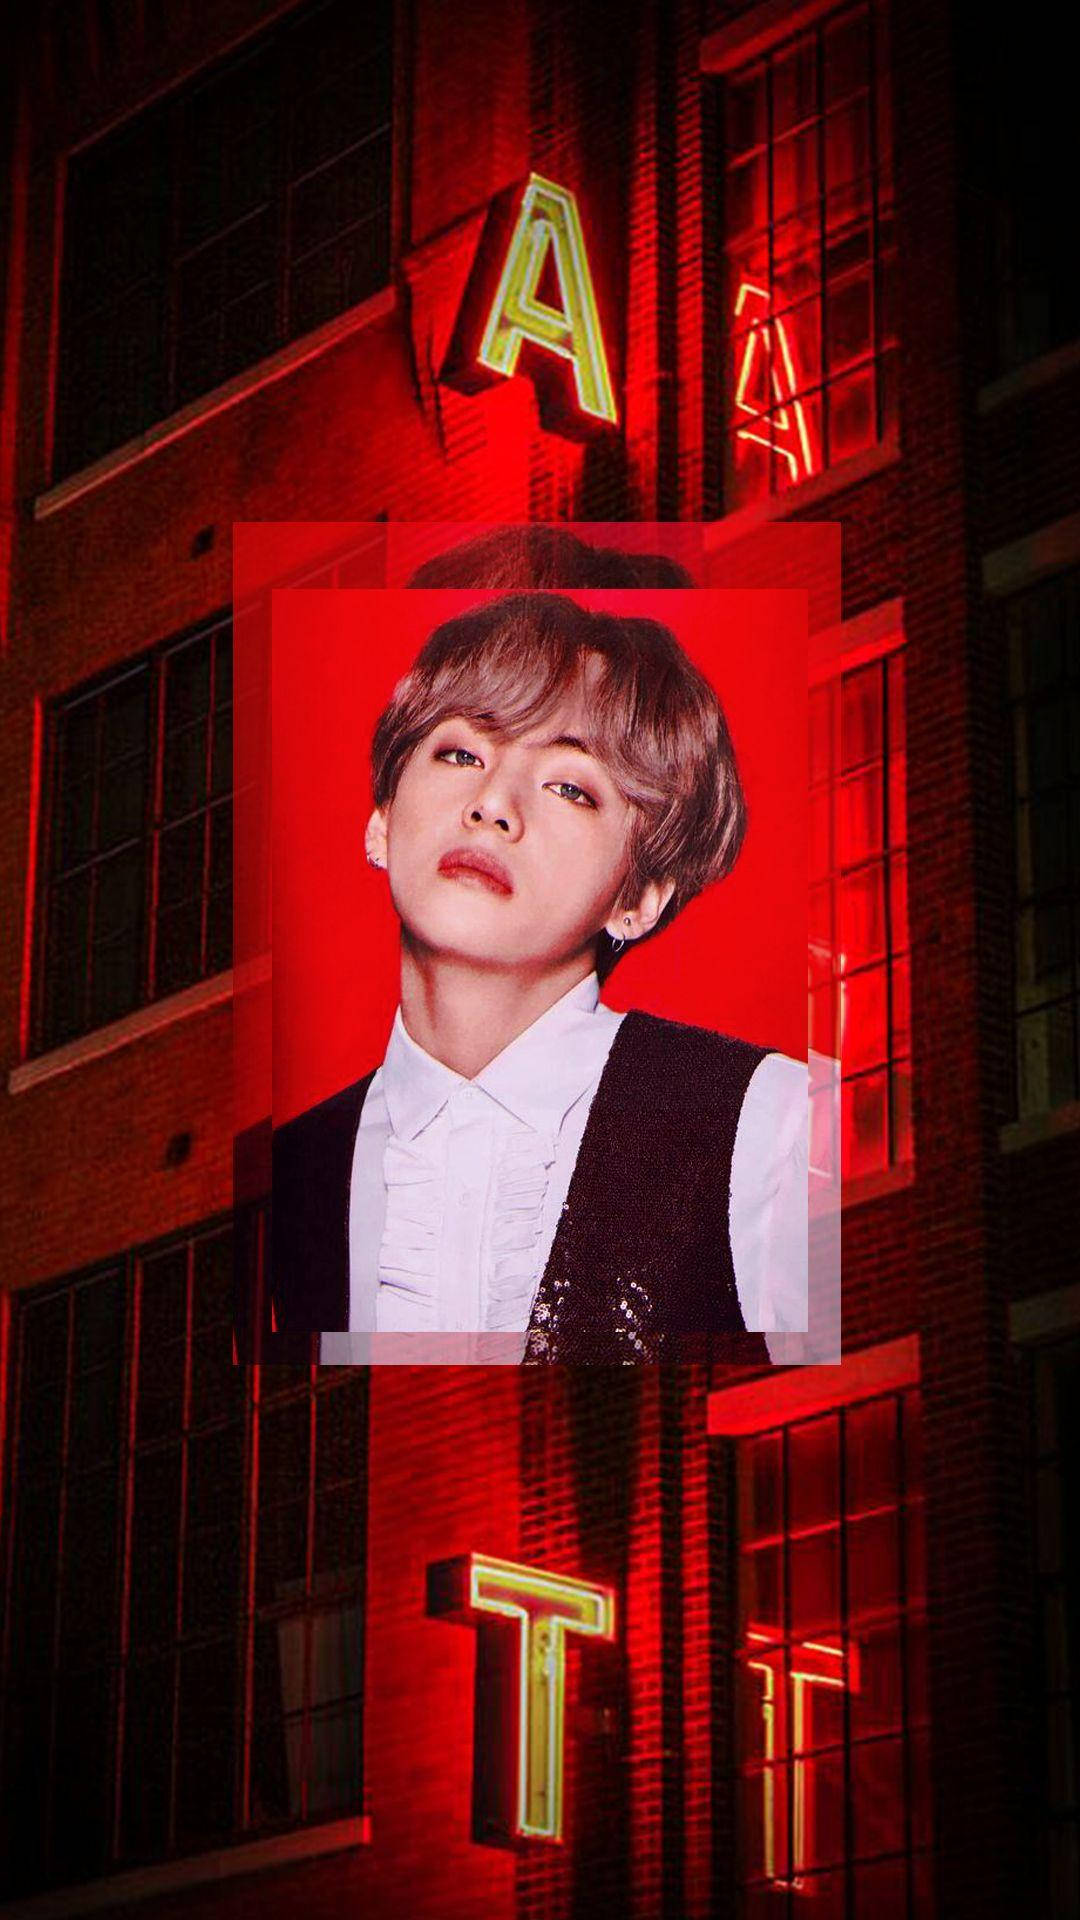 Bts Kim Taehyung Red Aesthetic Iphone Background